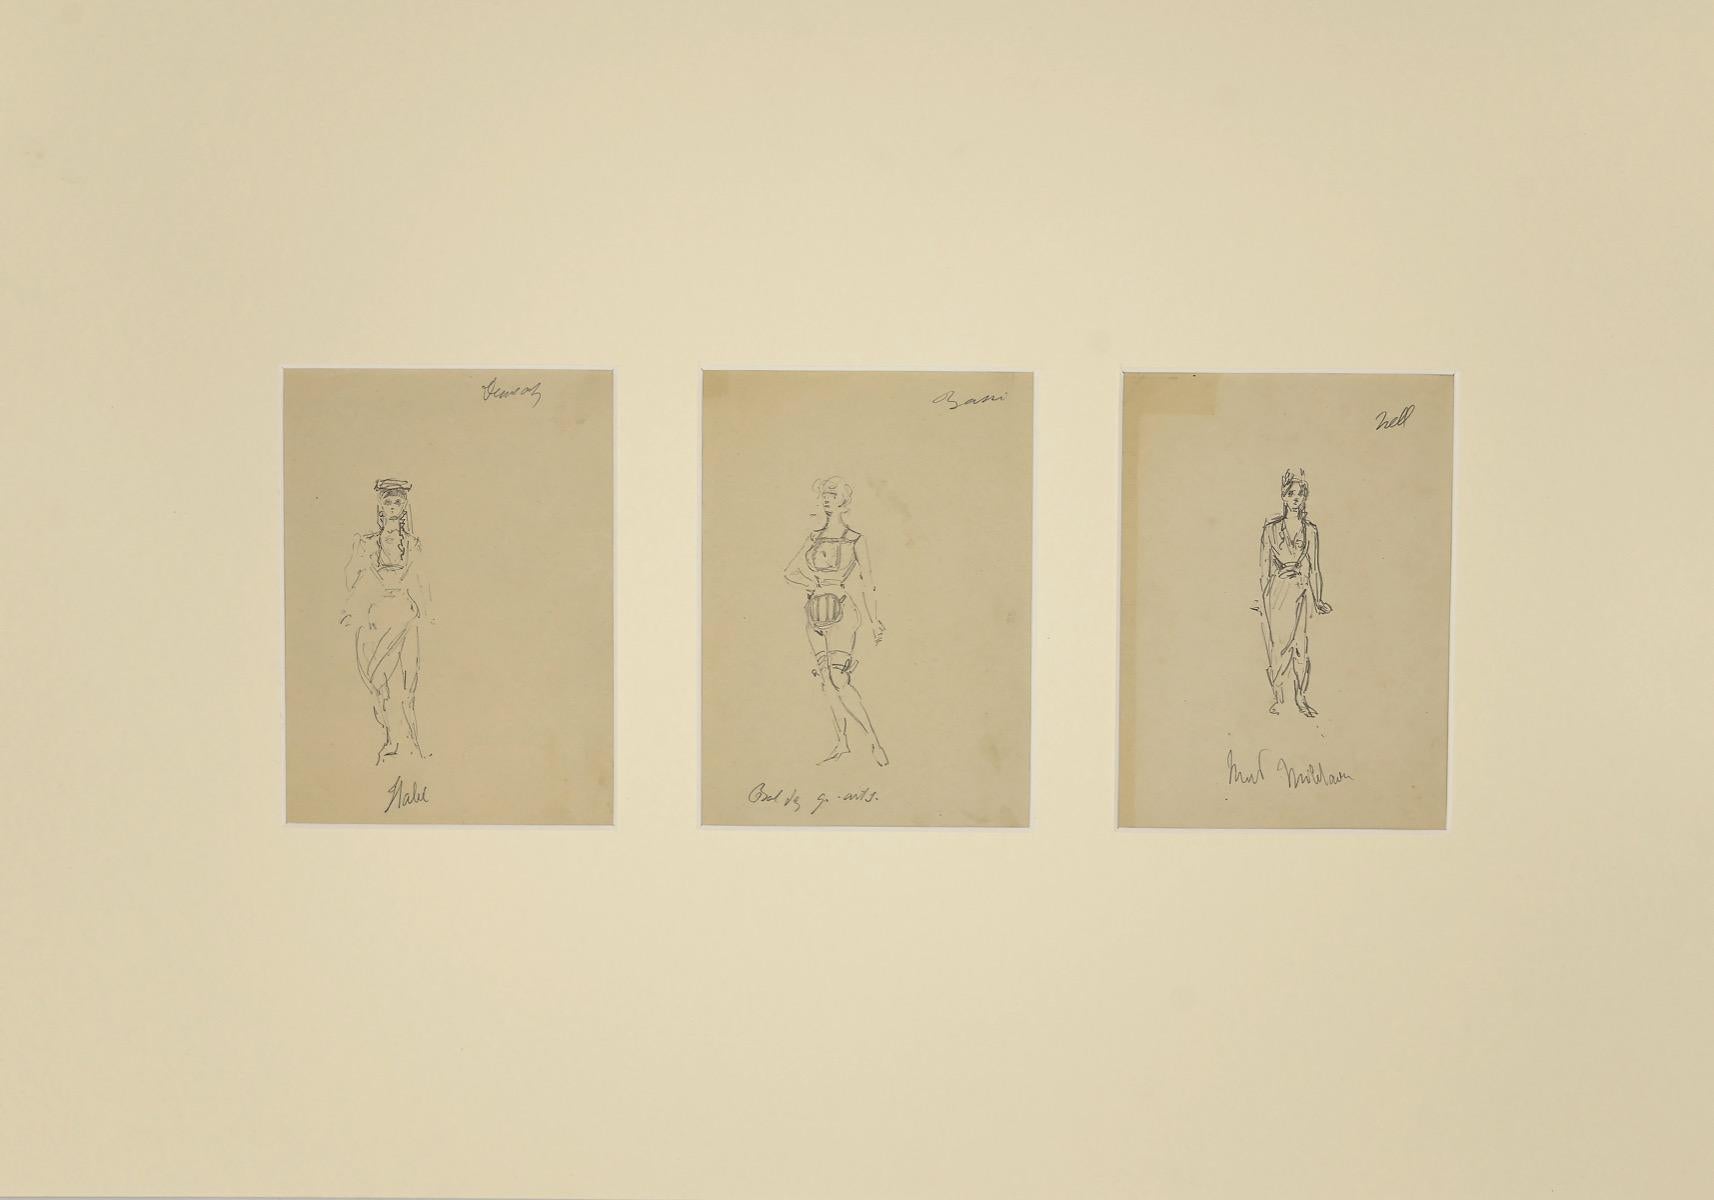 Unknown Figurative Art - Sketches for Theatrical Costumes - Original Pencil Drawing - 1880